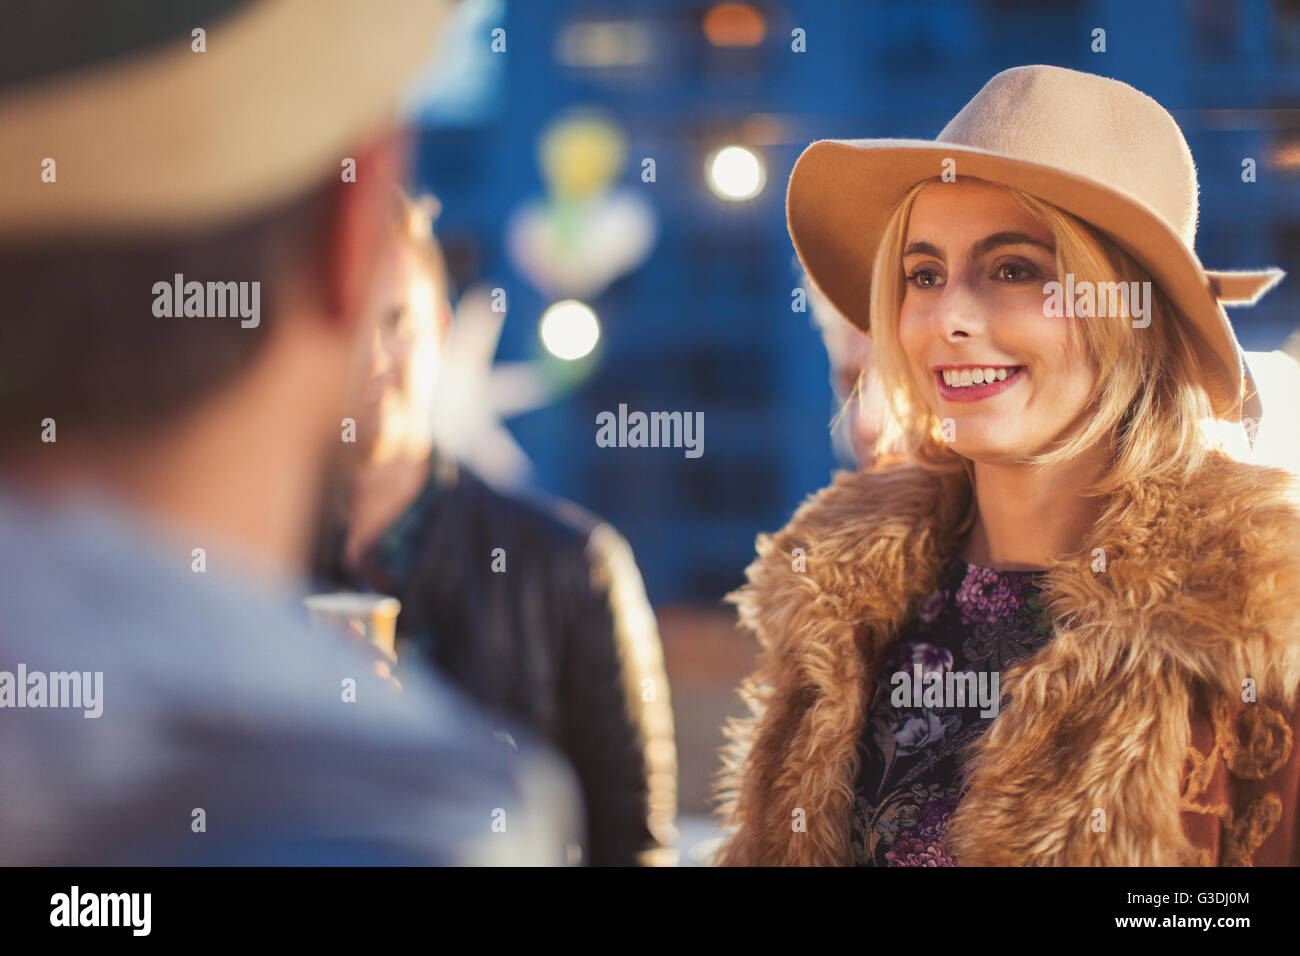 Smiling young woman socializing at party Stock Photo